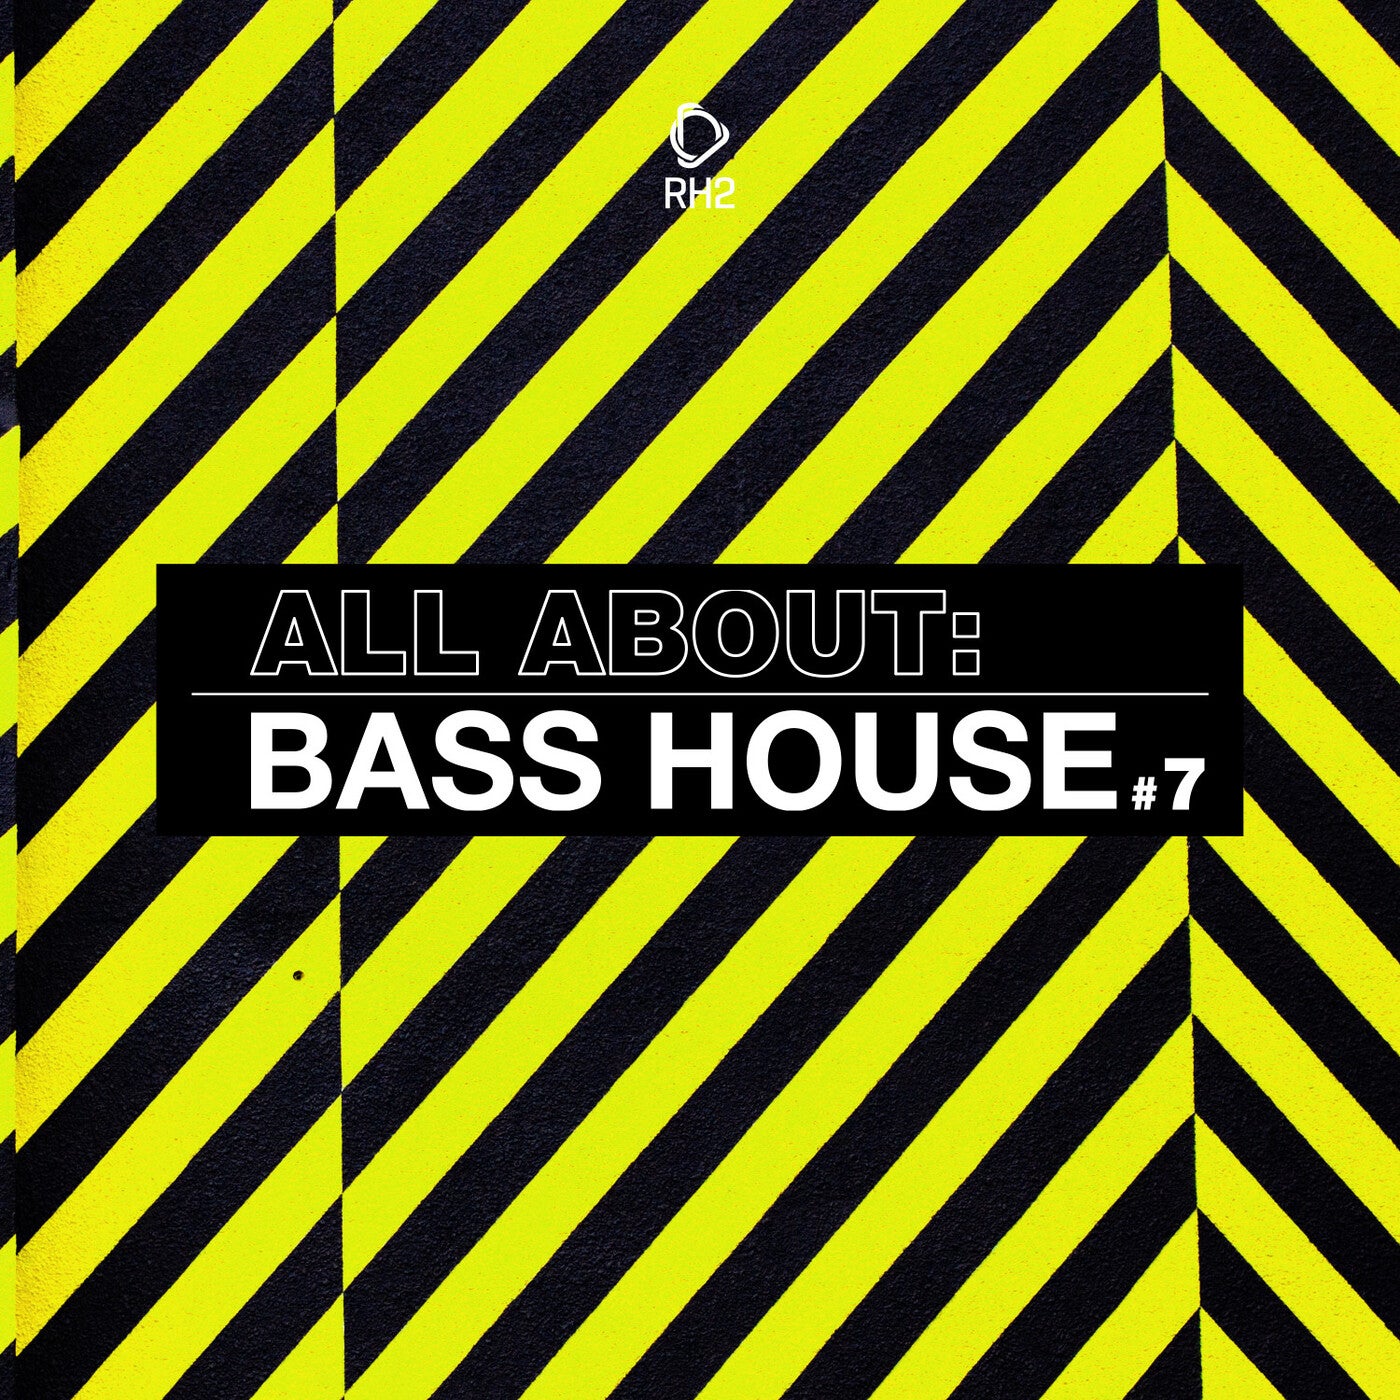 All About: Bass House Vol. 7